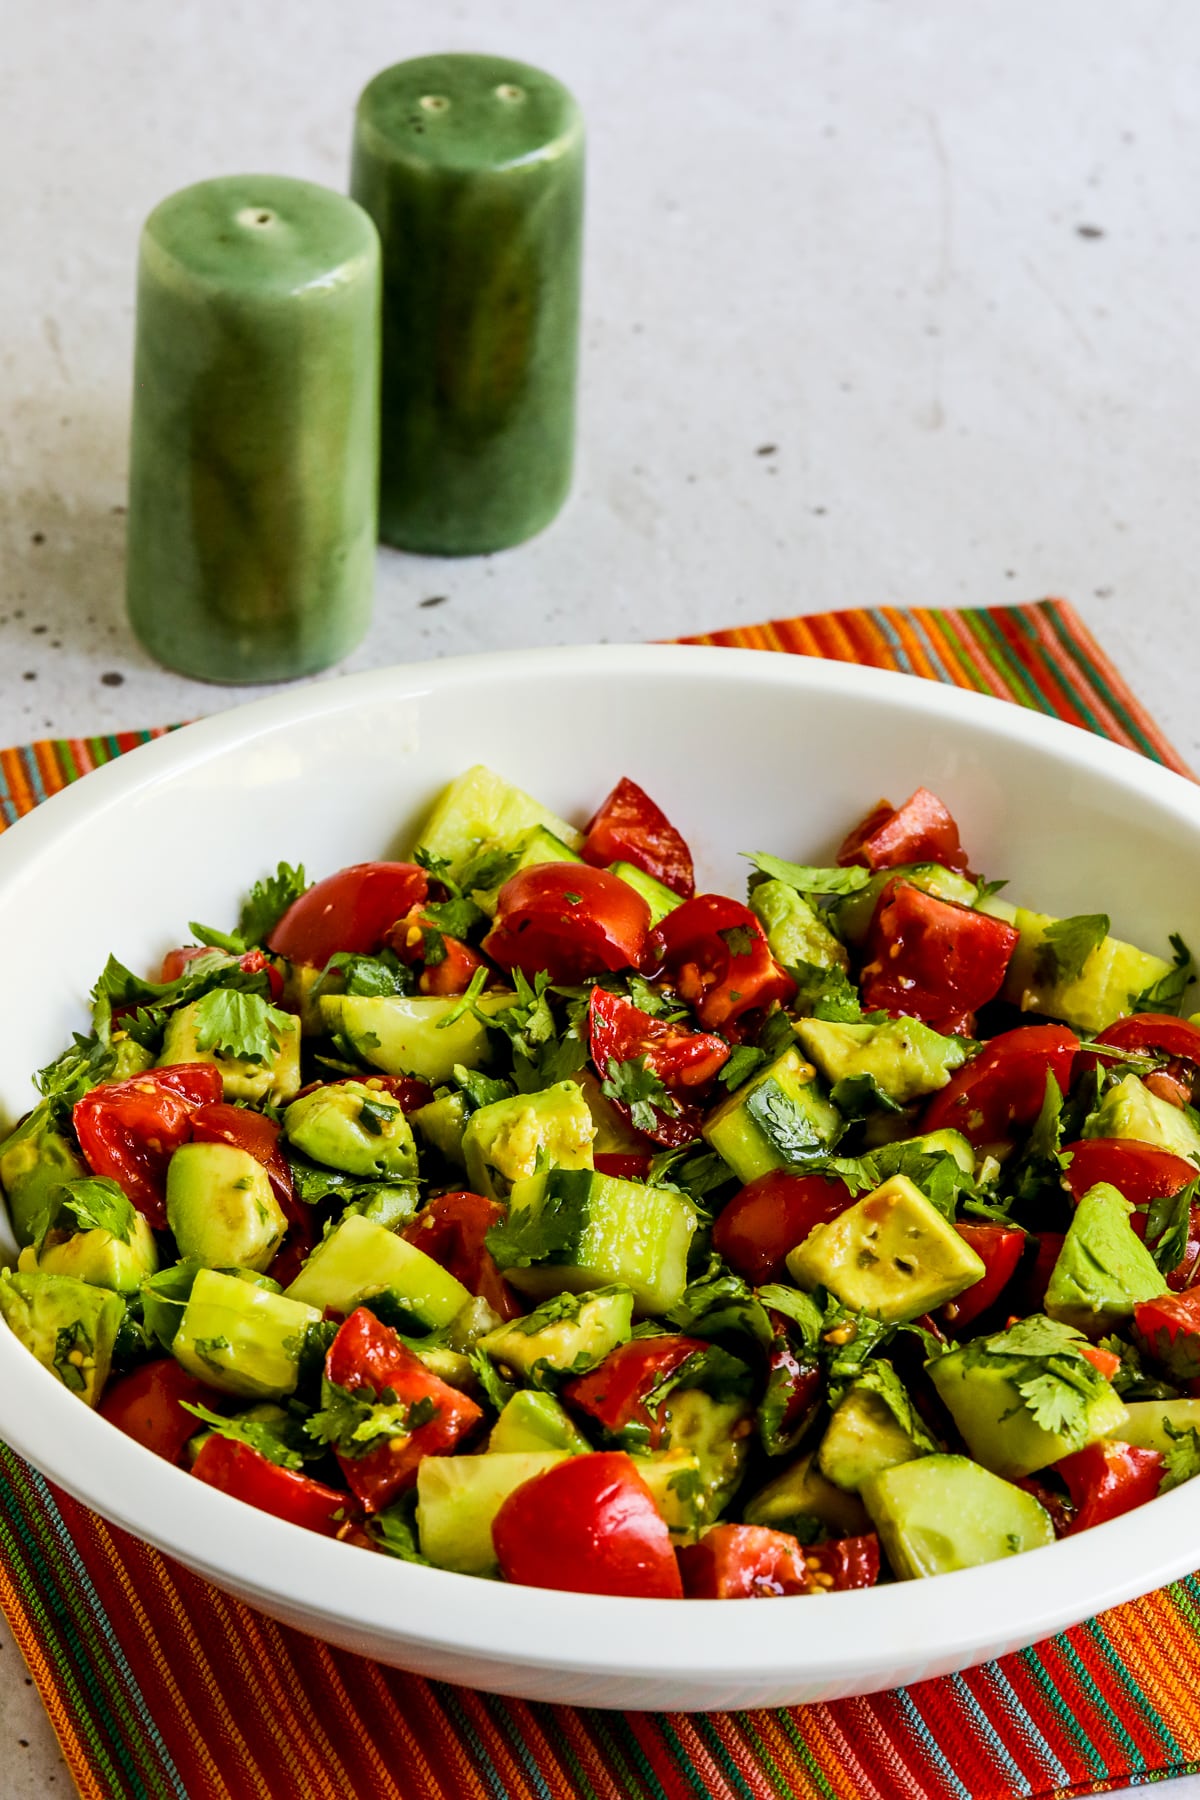 Tomato Salad with Cucumbers, Avocado, and Cilantro in bowl with green salt-pepper shakers.